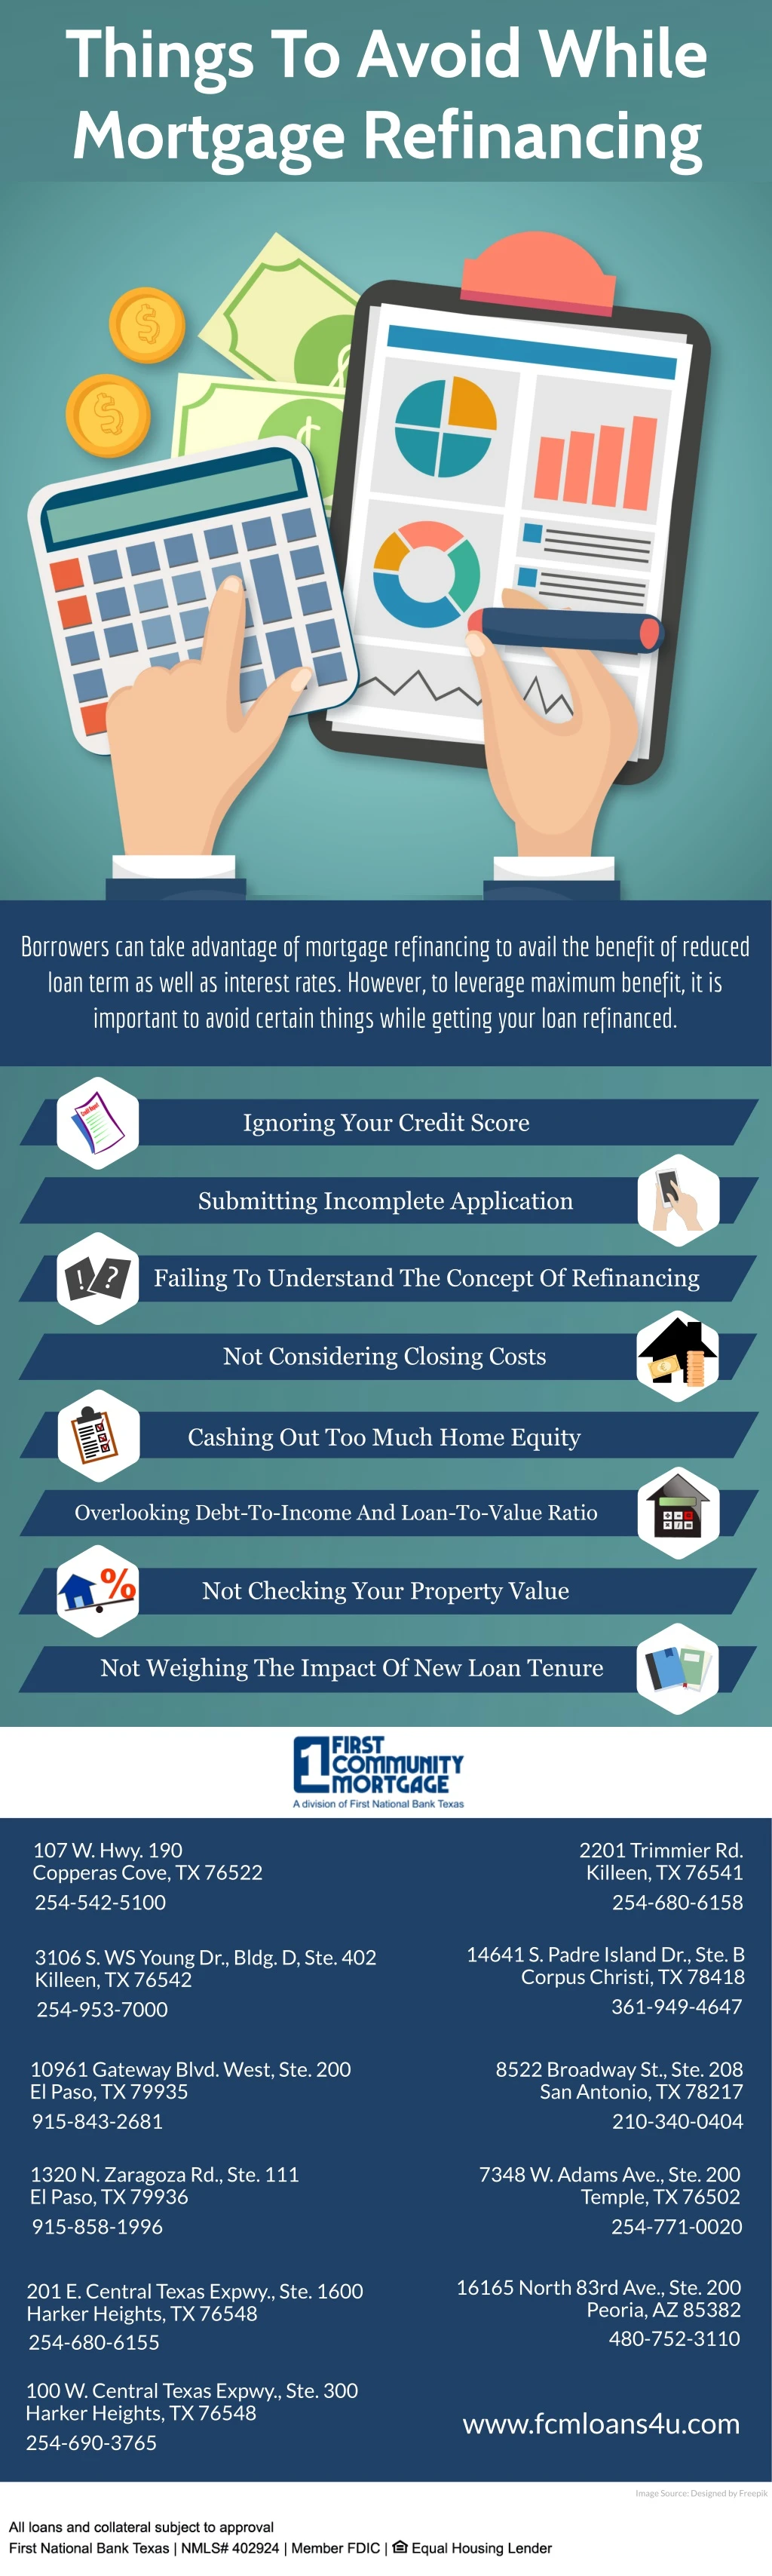 things to avoid while mortgage refinancing